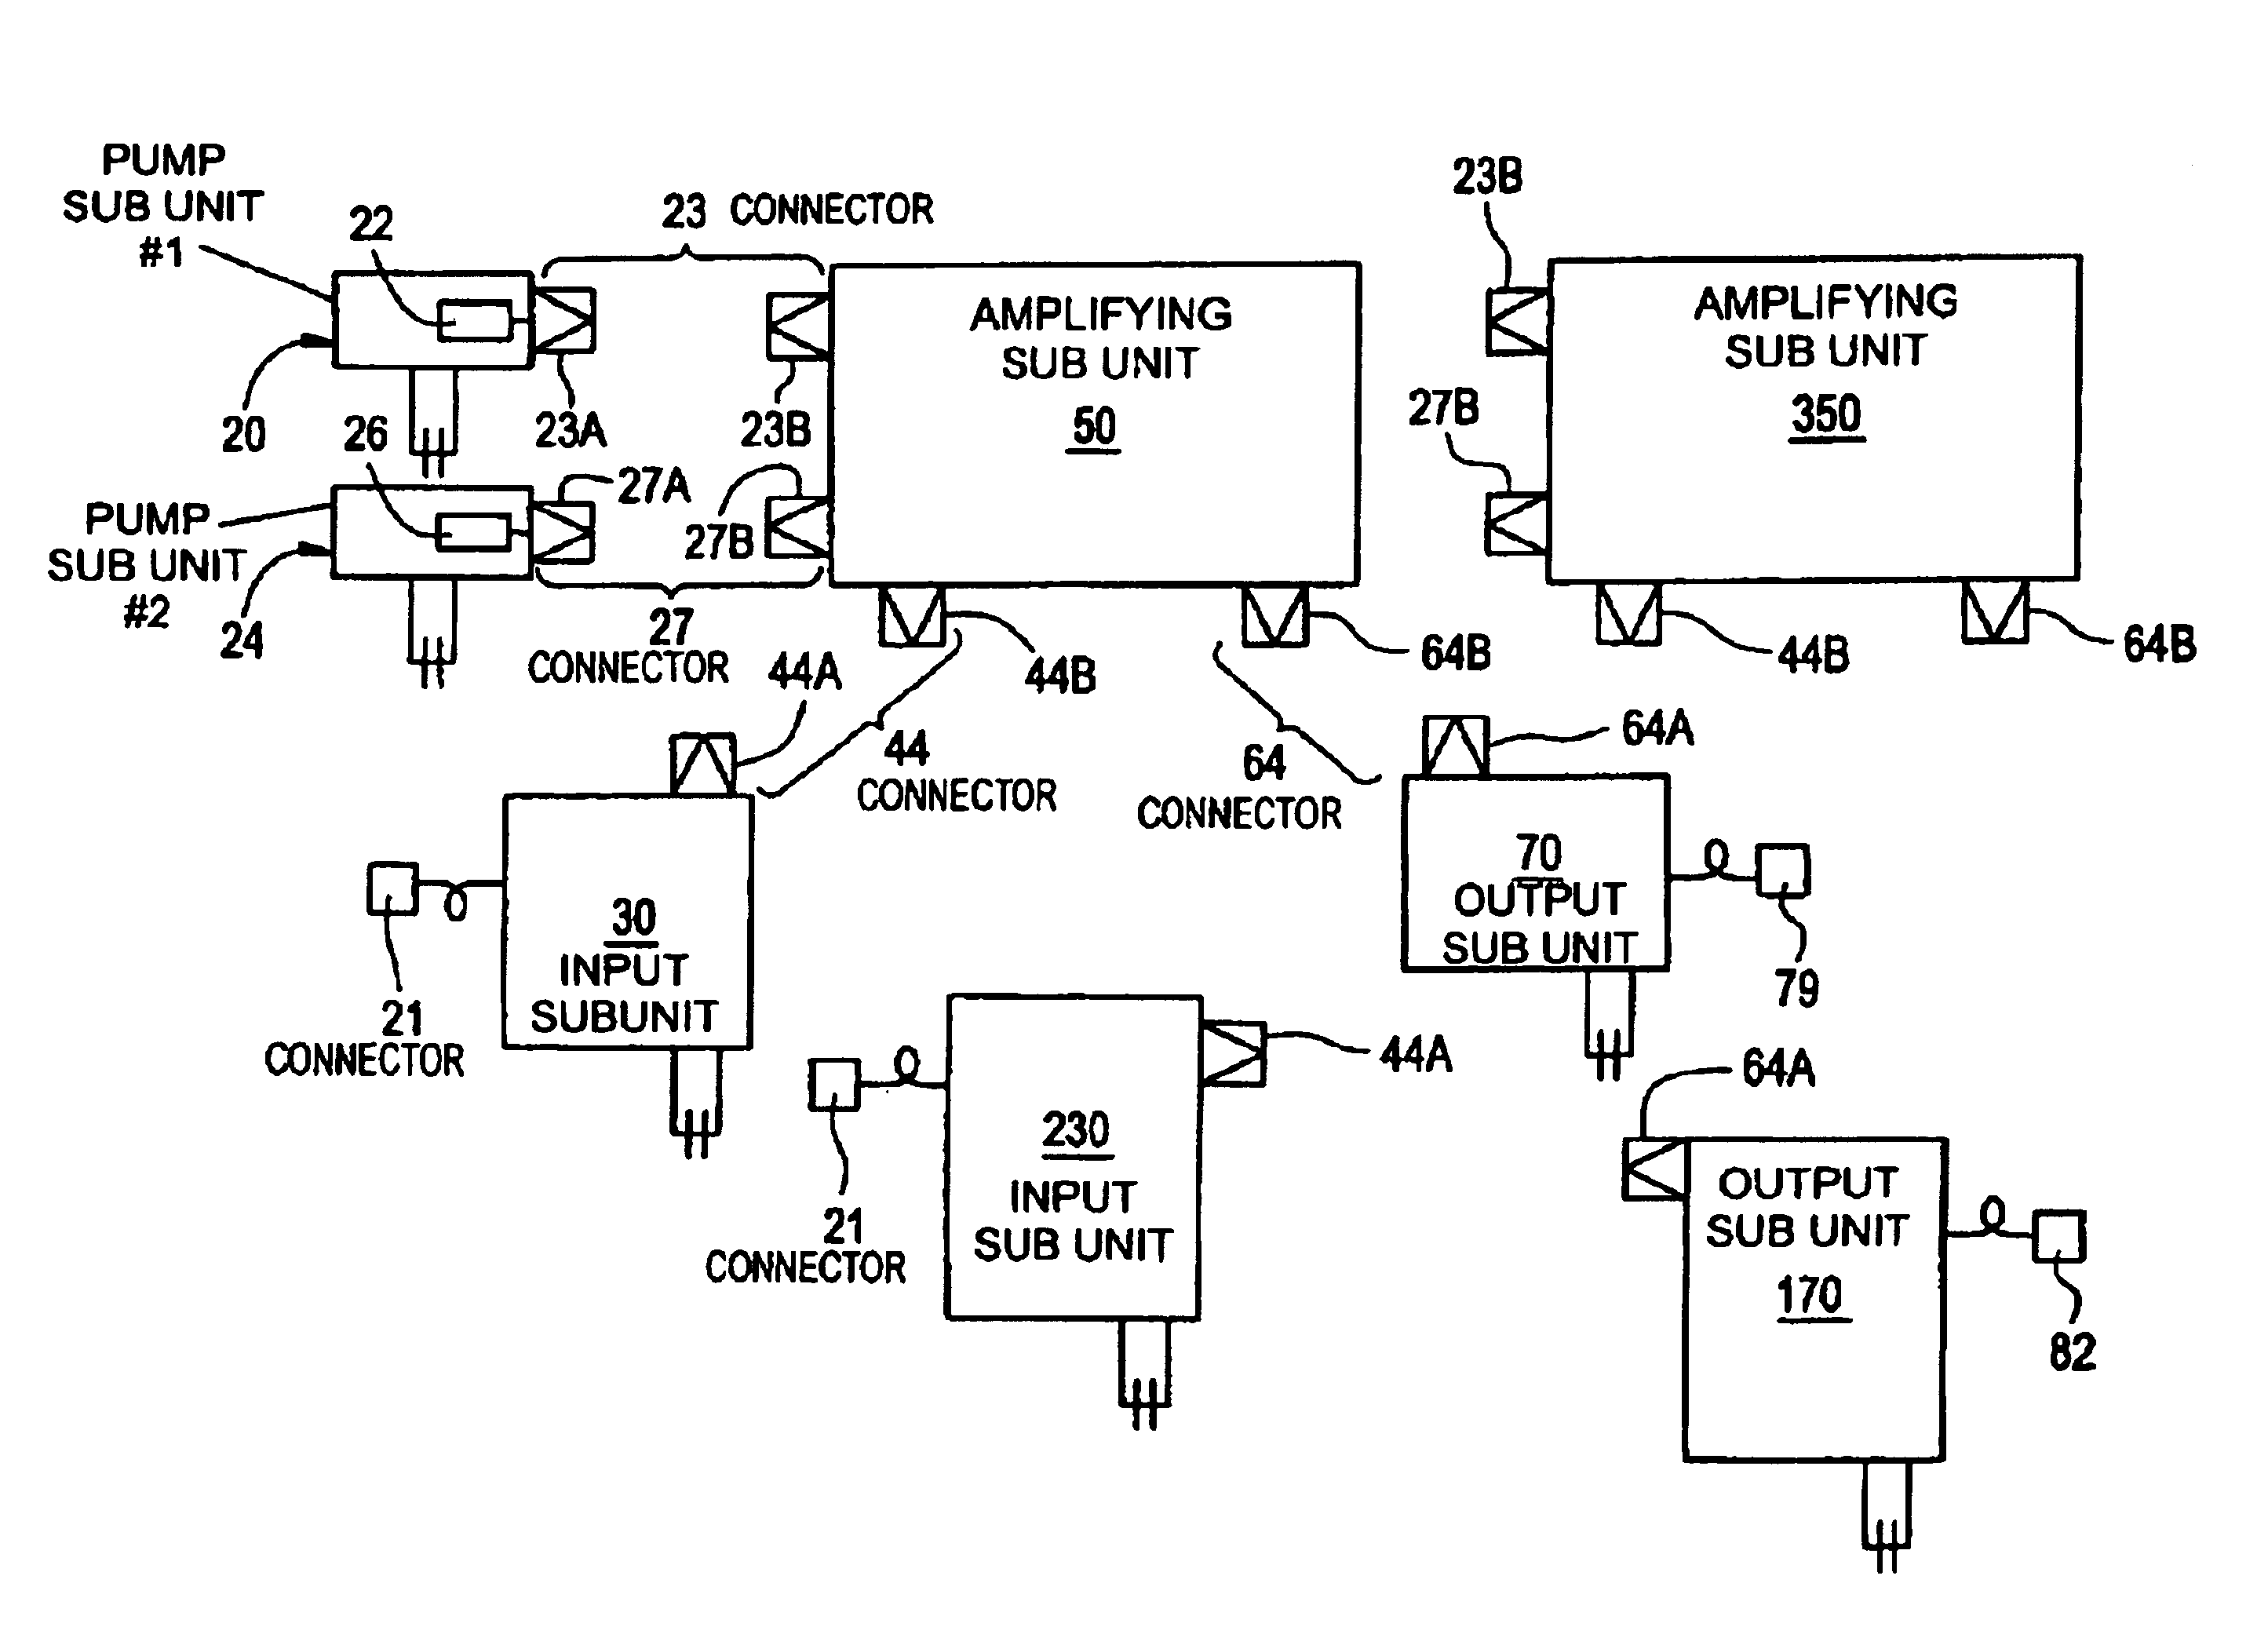 Apparatus and method for making an optical fiber amplifier